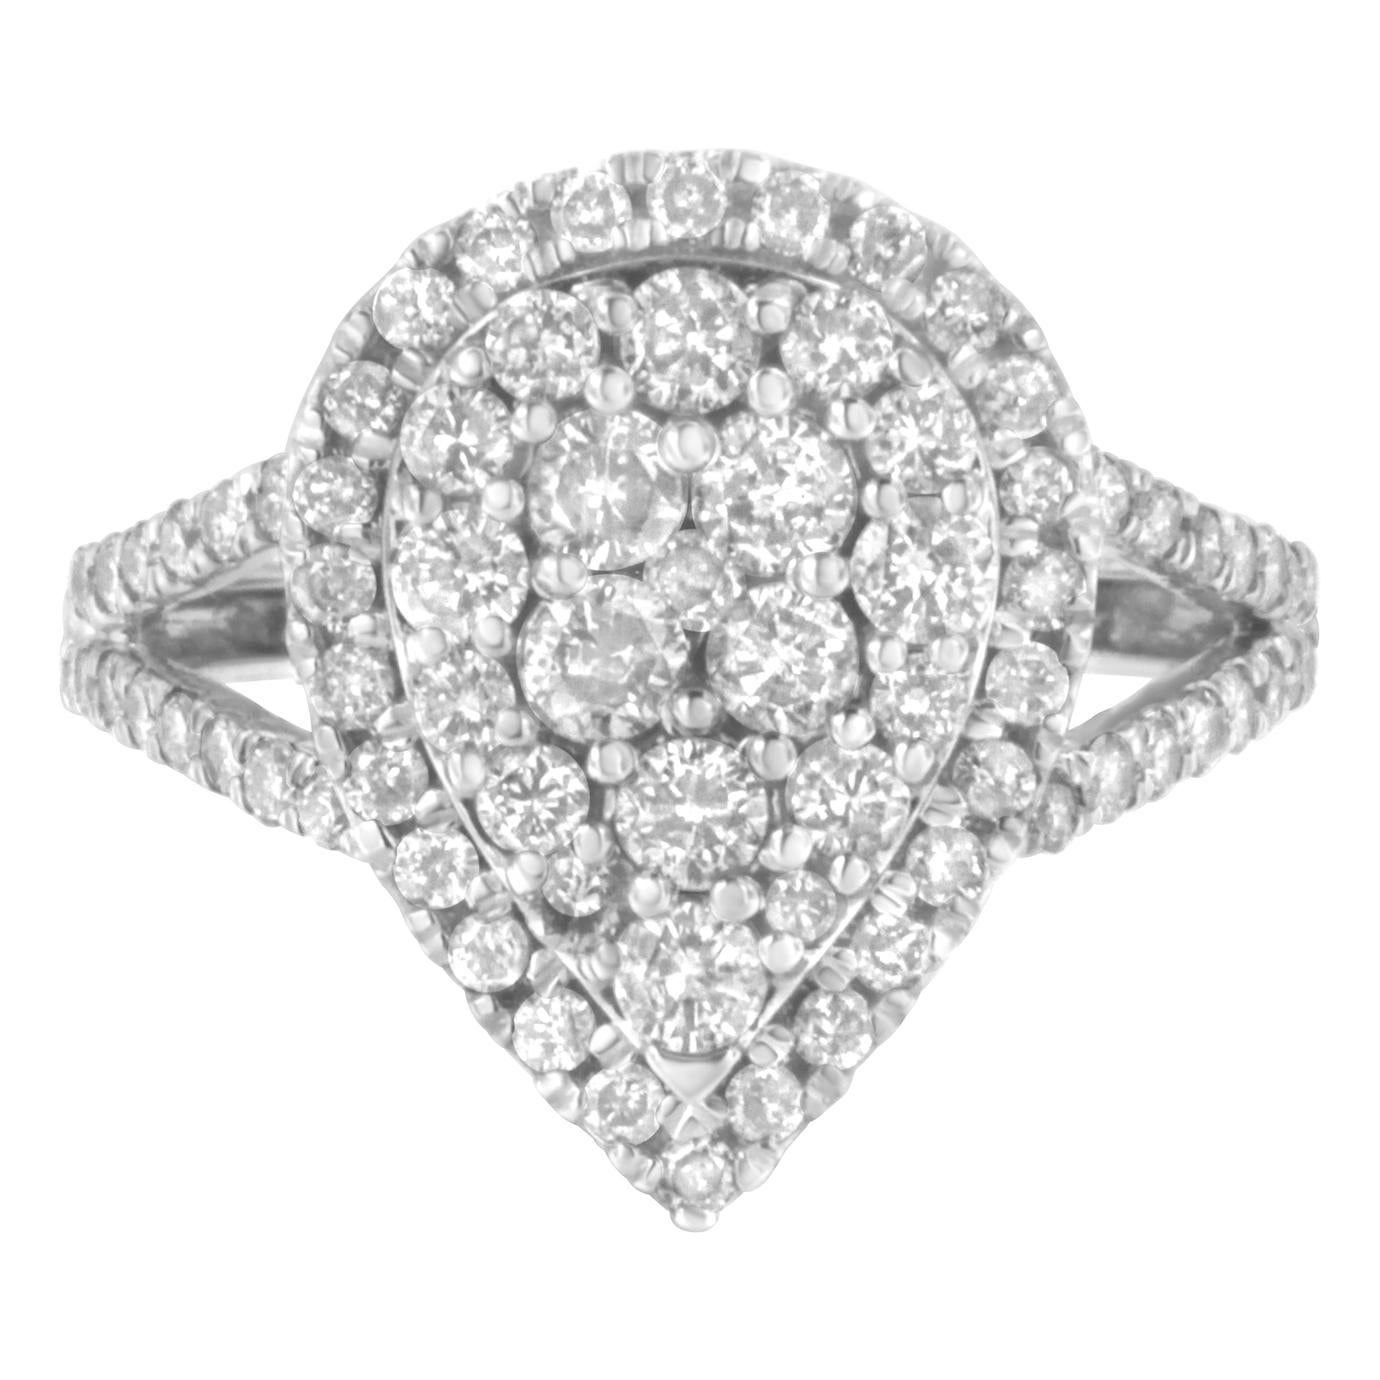 .925 Sterling Silver 1 1/2 Cttw Diamond Cluster Ring (H-I Color, I1-I2 Clarity) For Sale